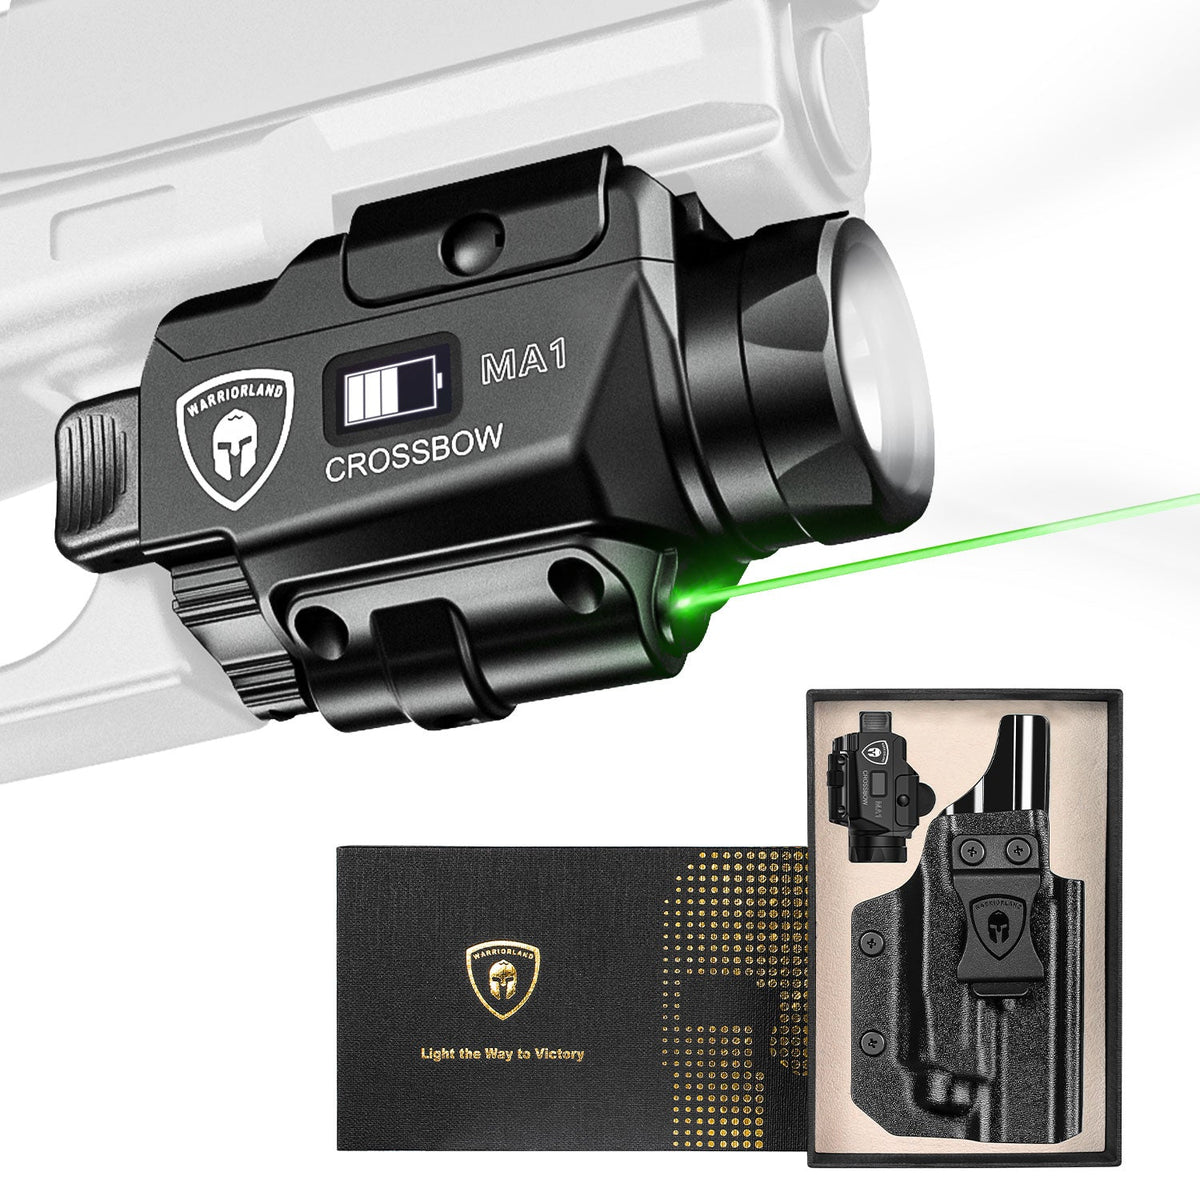 Universal Light Laser Combo with Glock 17/19 KYDEX Holster, Green Laser & White LED Tactical Light, Magnetic USB Rechargeable Flashlight-Screen Displays Battery Status, Crossbow MA1|WARRIORLAND